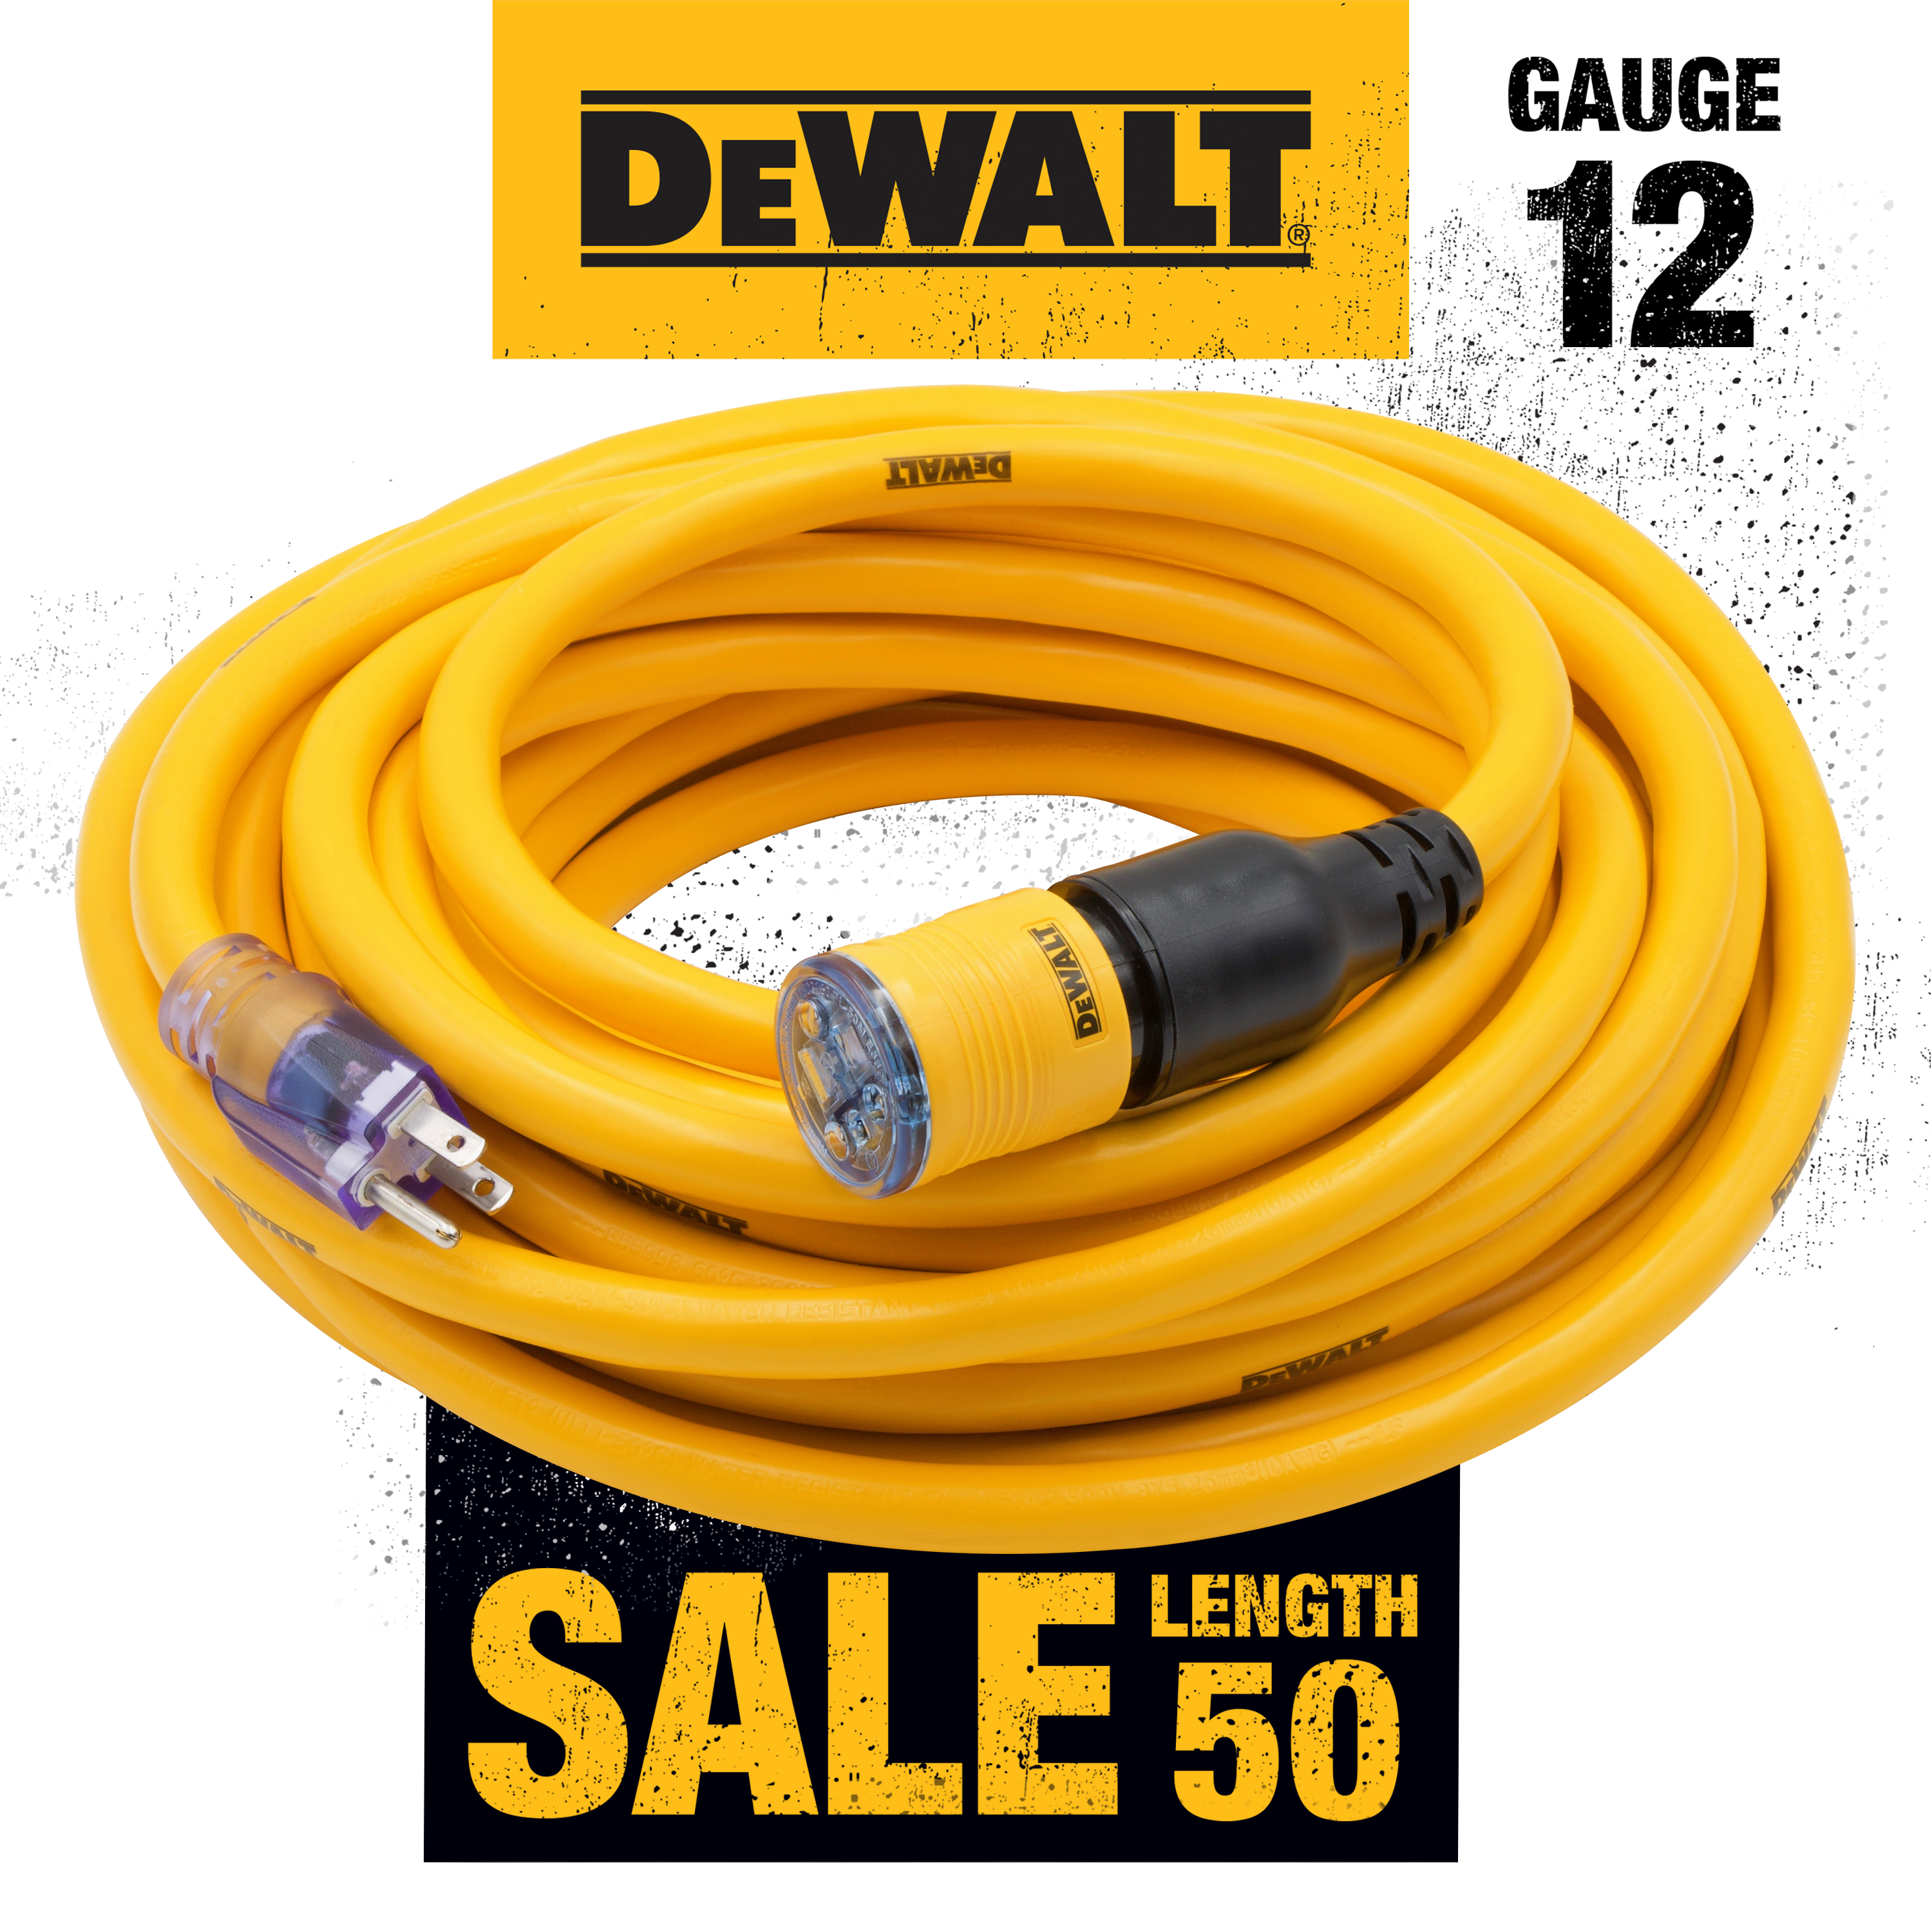 Click-to-Lock DEWALT Dual Lighted Extension Cord – Bad Ass